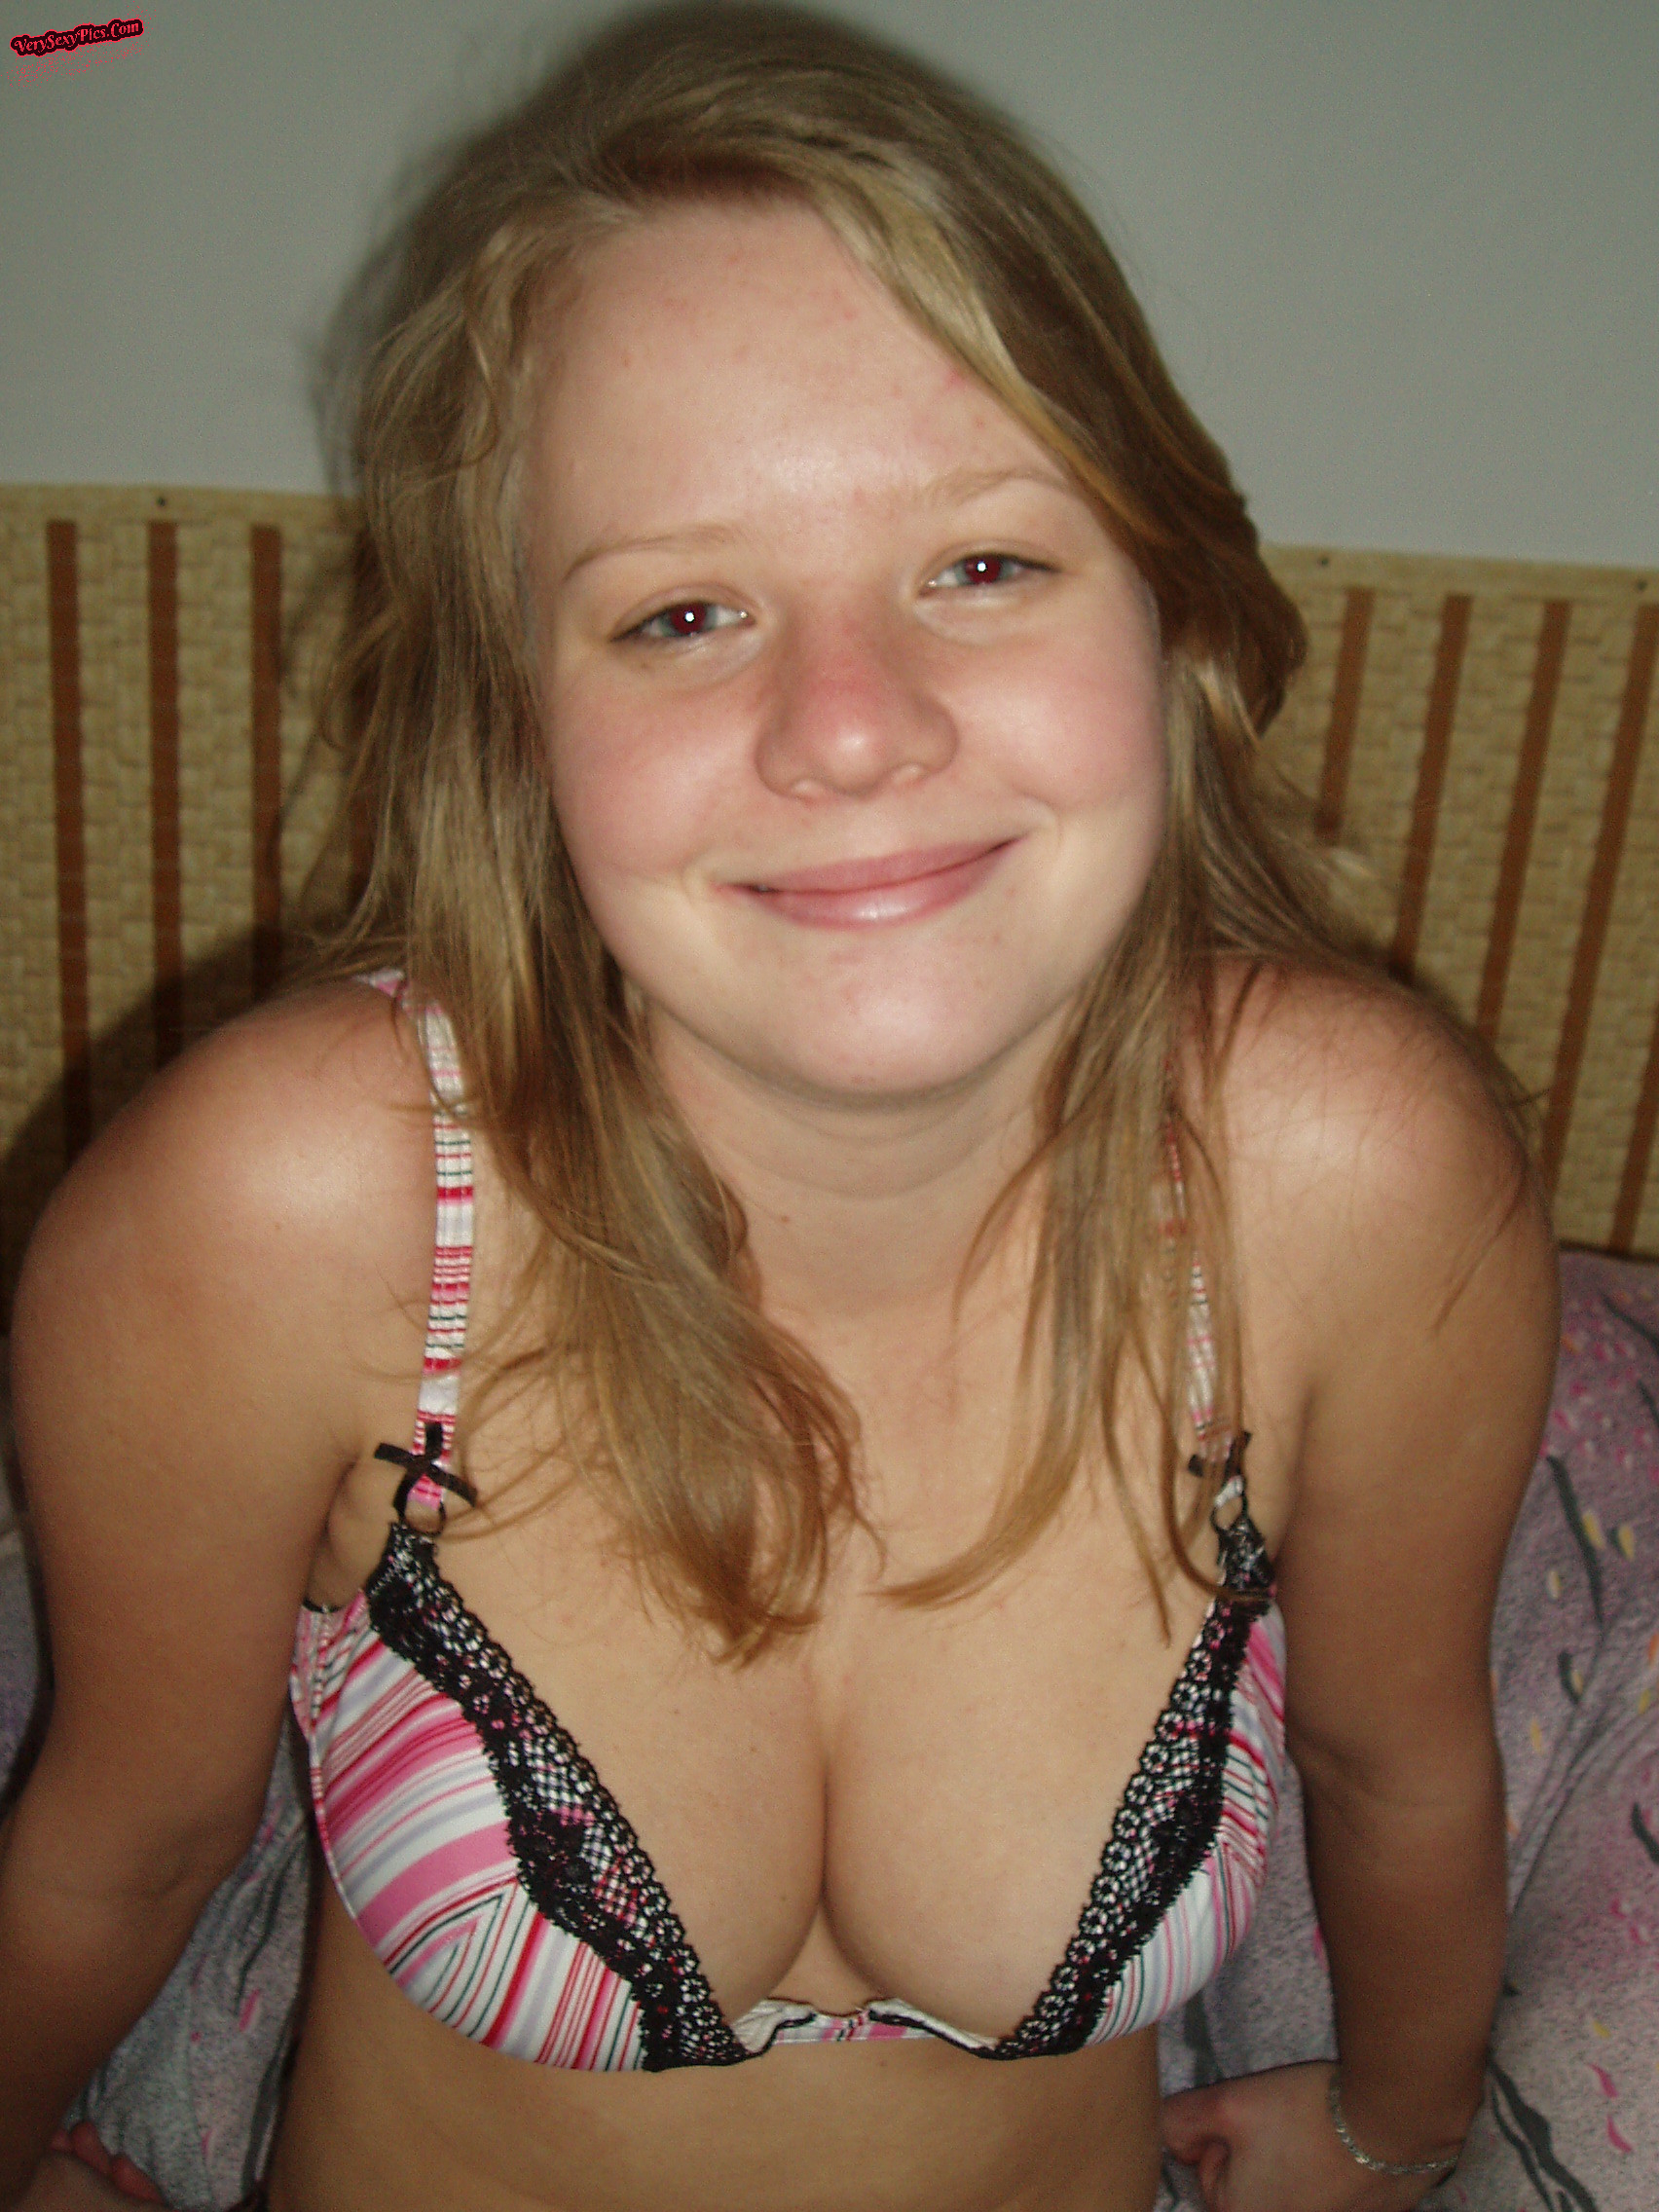 Chubby amateur teens bored at home